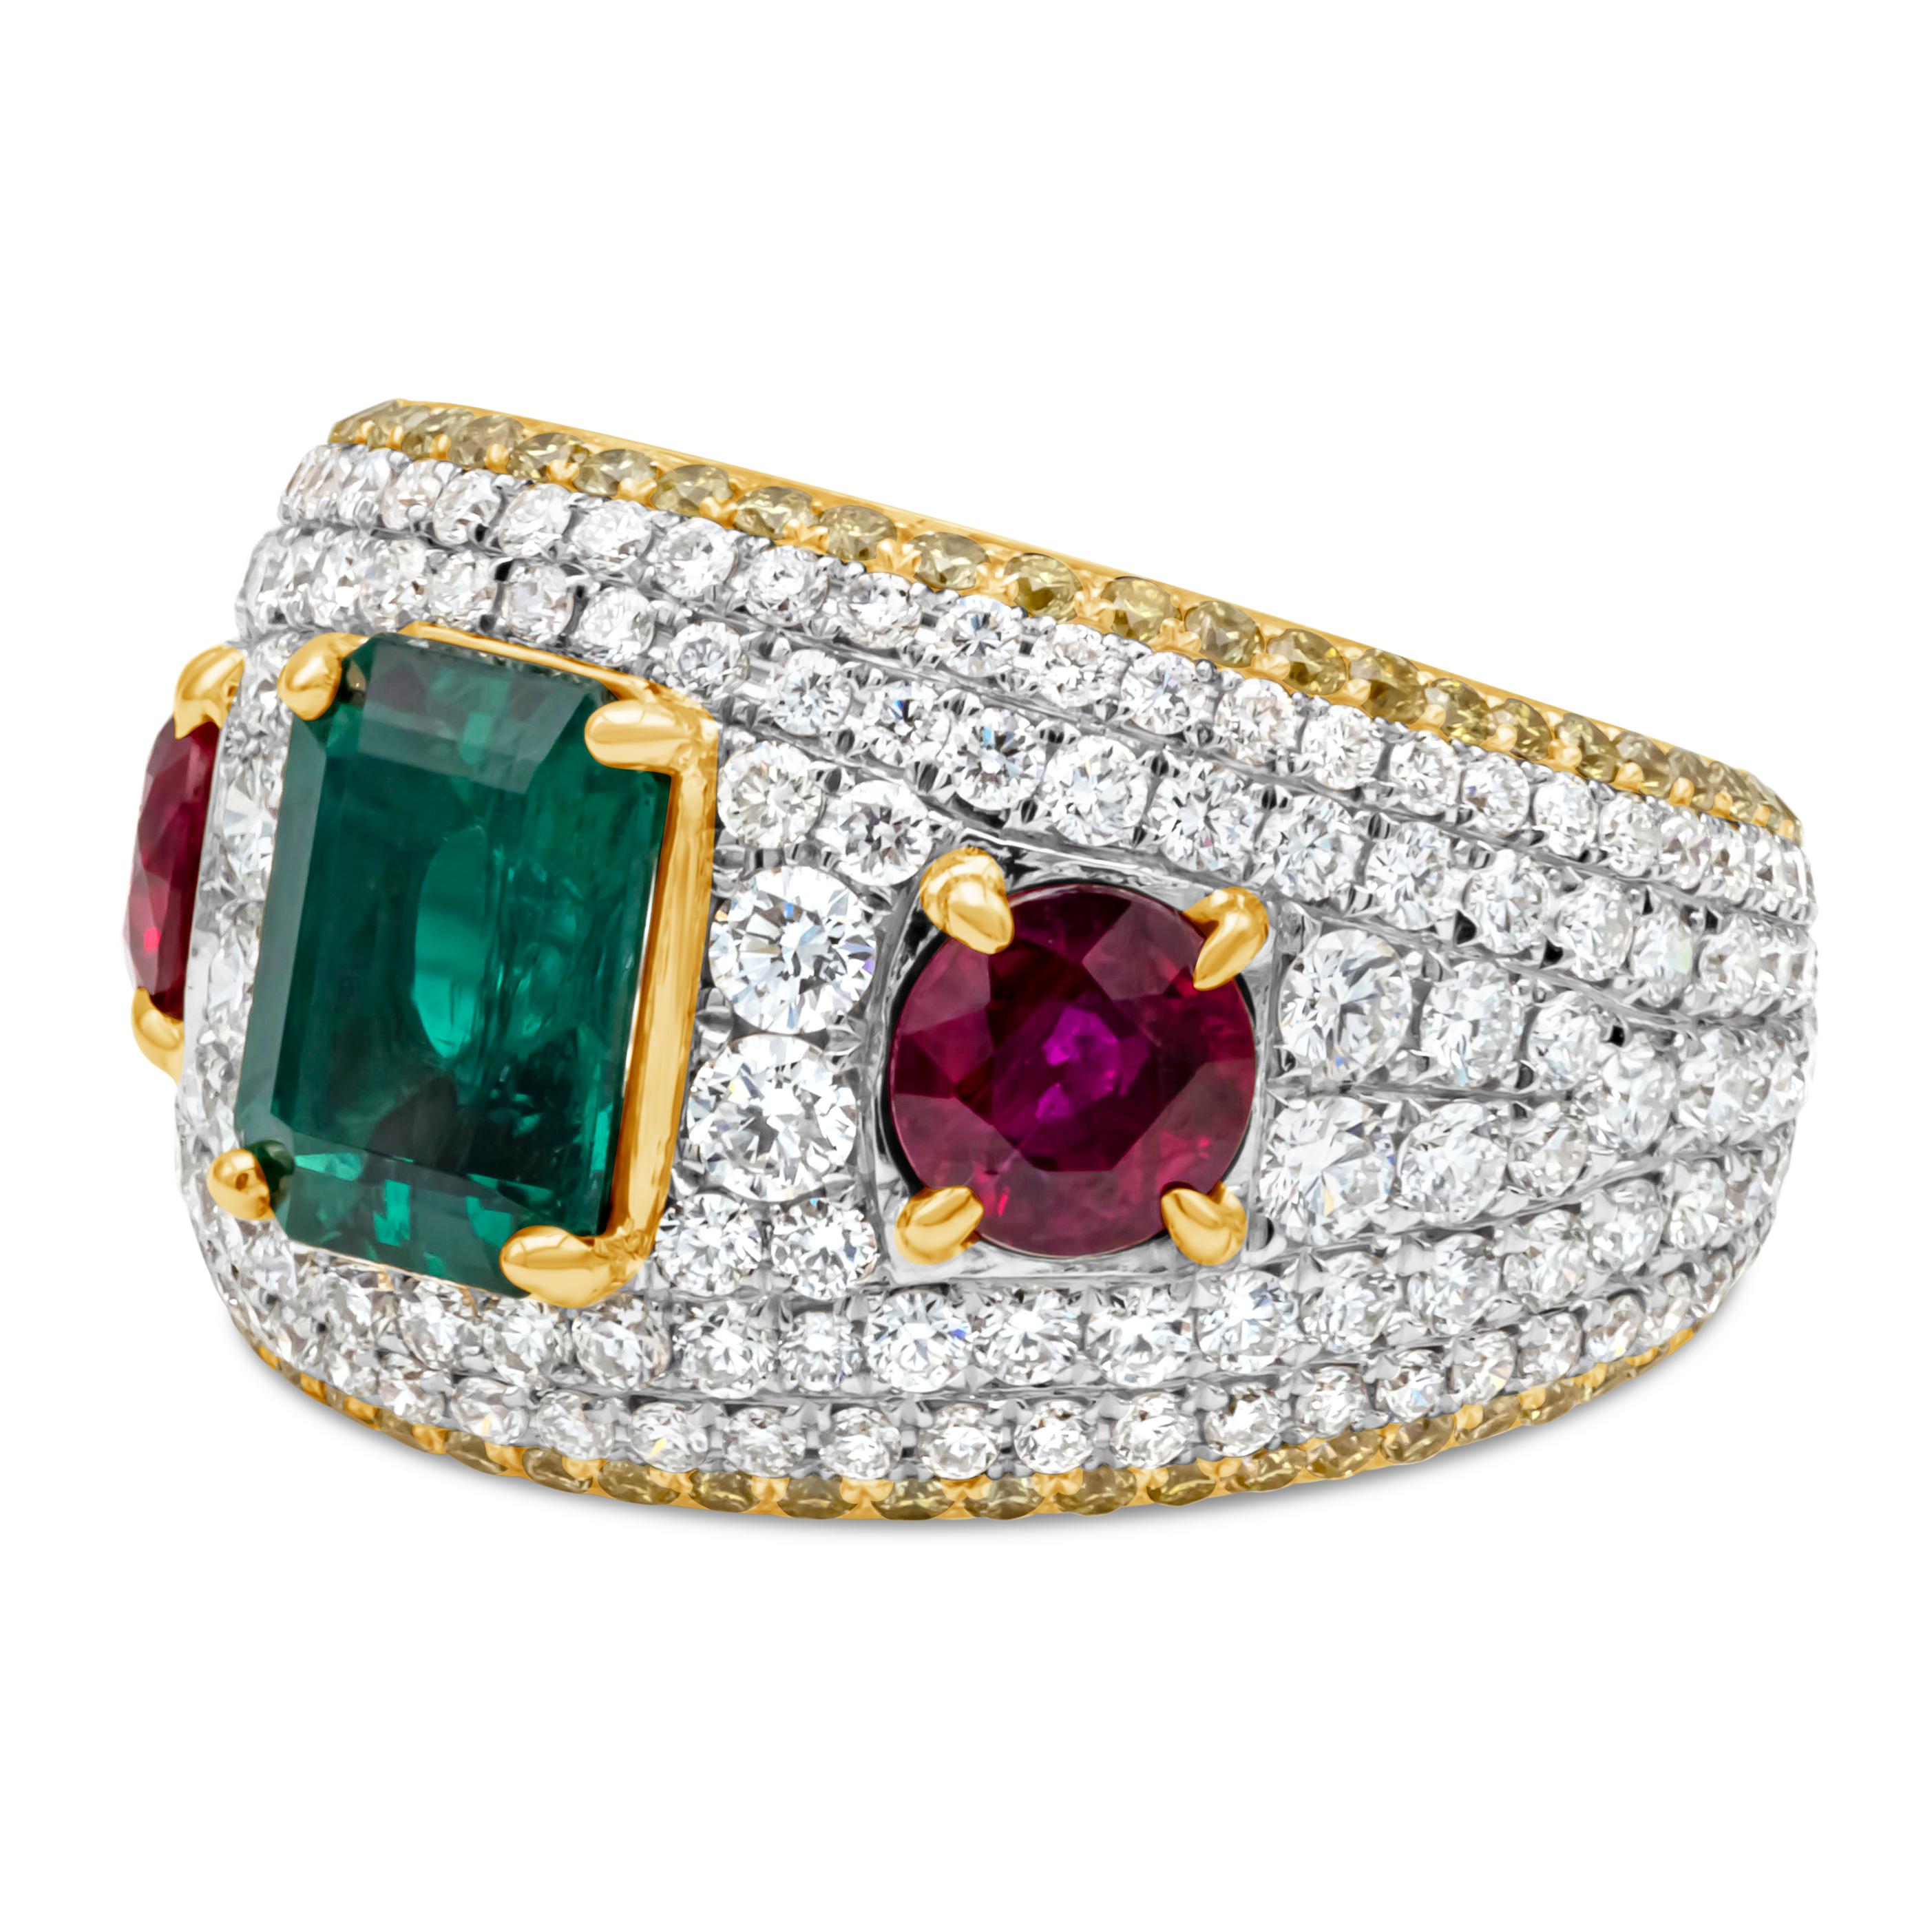 An exquisite and stylish fashion ring showcasing 1.37 carats emerald cut green emerald, and 2 round cut color-rich red ruby weighing 1.25 carats total, Accented by brilliant round white and yellow diamond micro-pave set in a domed setting weighing